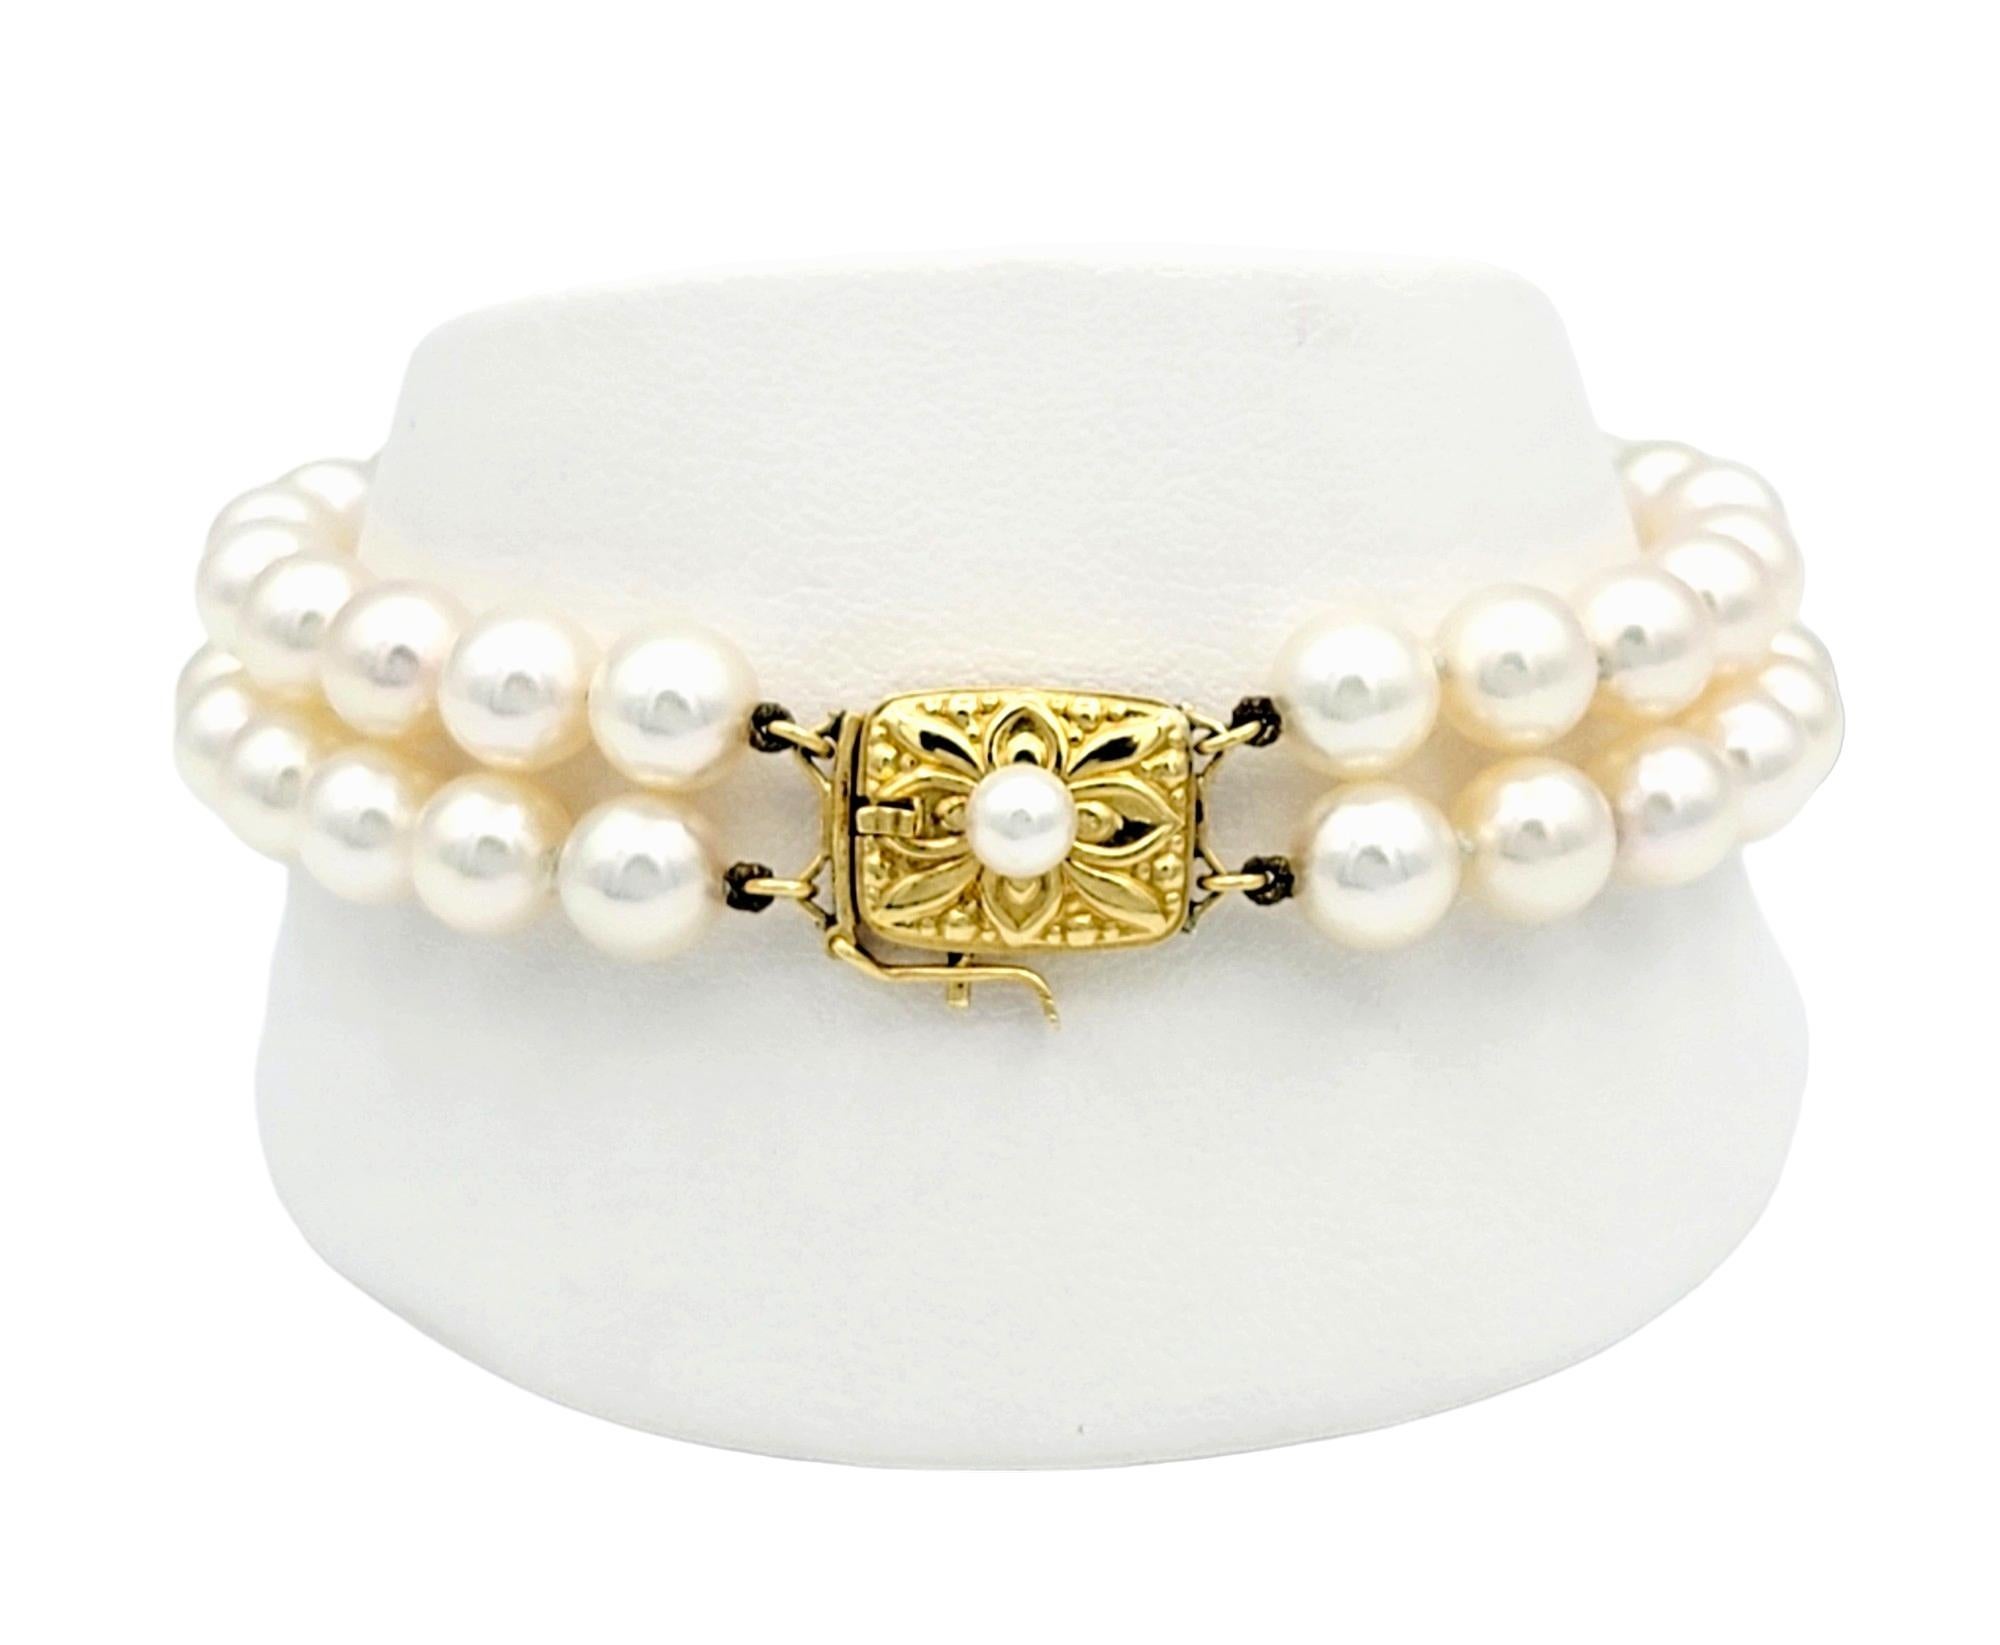 Double Strand Akoya Cultured Pearl Station Bracelet in 18 Karat Yellow Gold For Sale 3